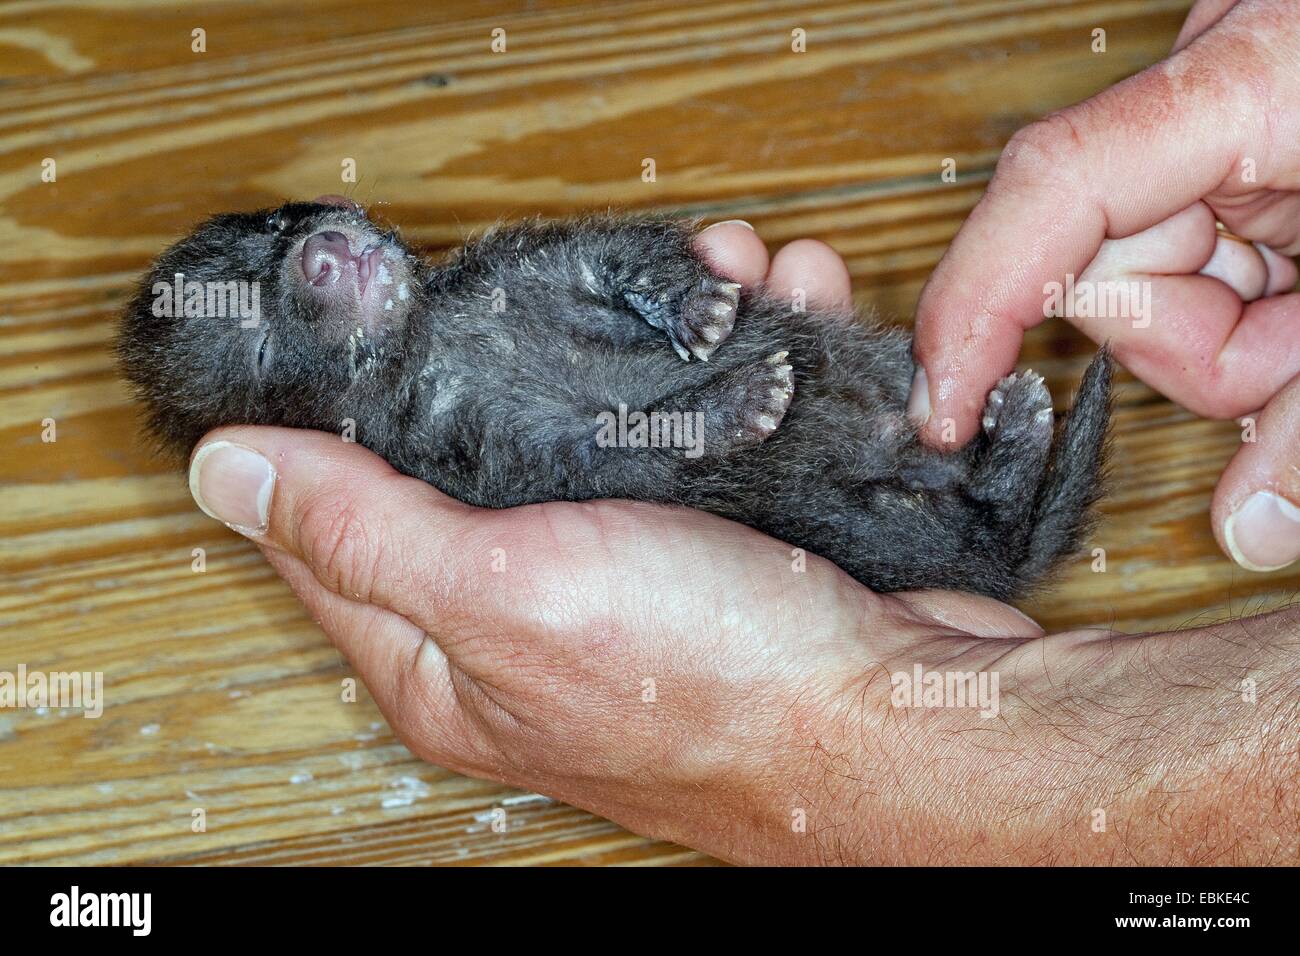 raccoon dog (Nyctereutes procyonoides), upbringing by hand orphaned pup becoming belly massage to promote digestion, Germany Stock Photo